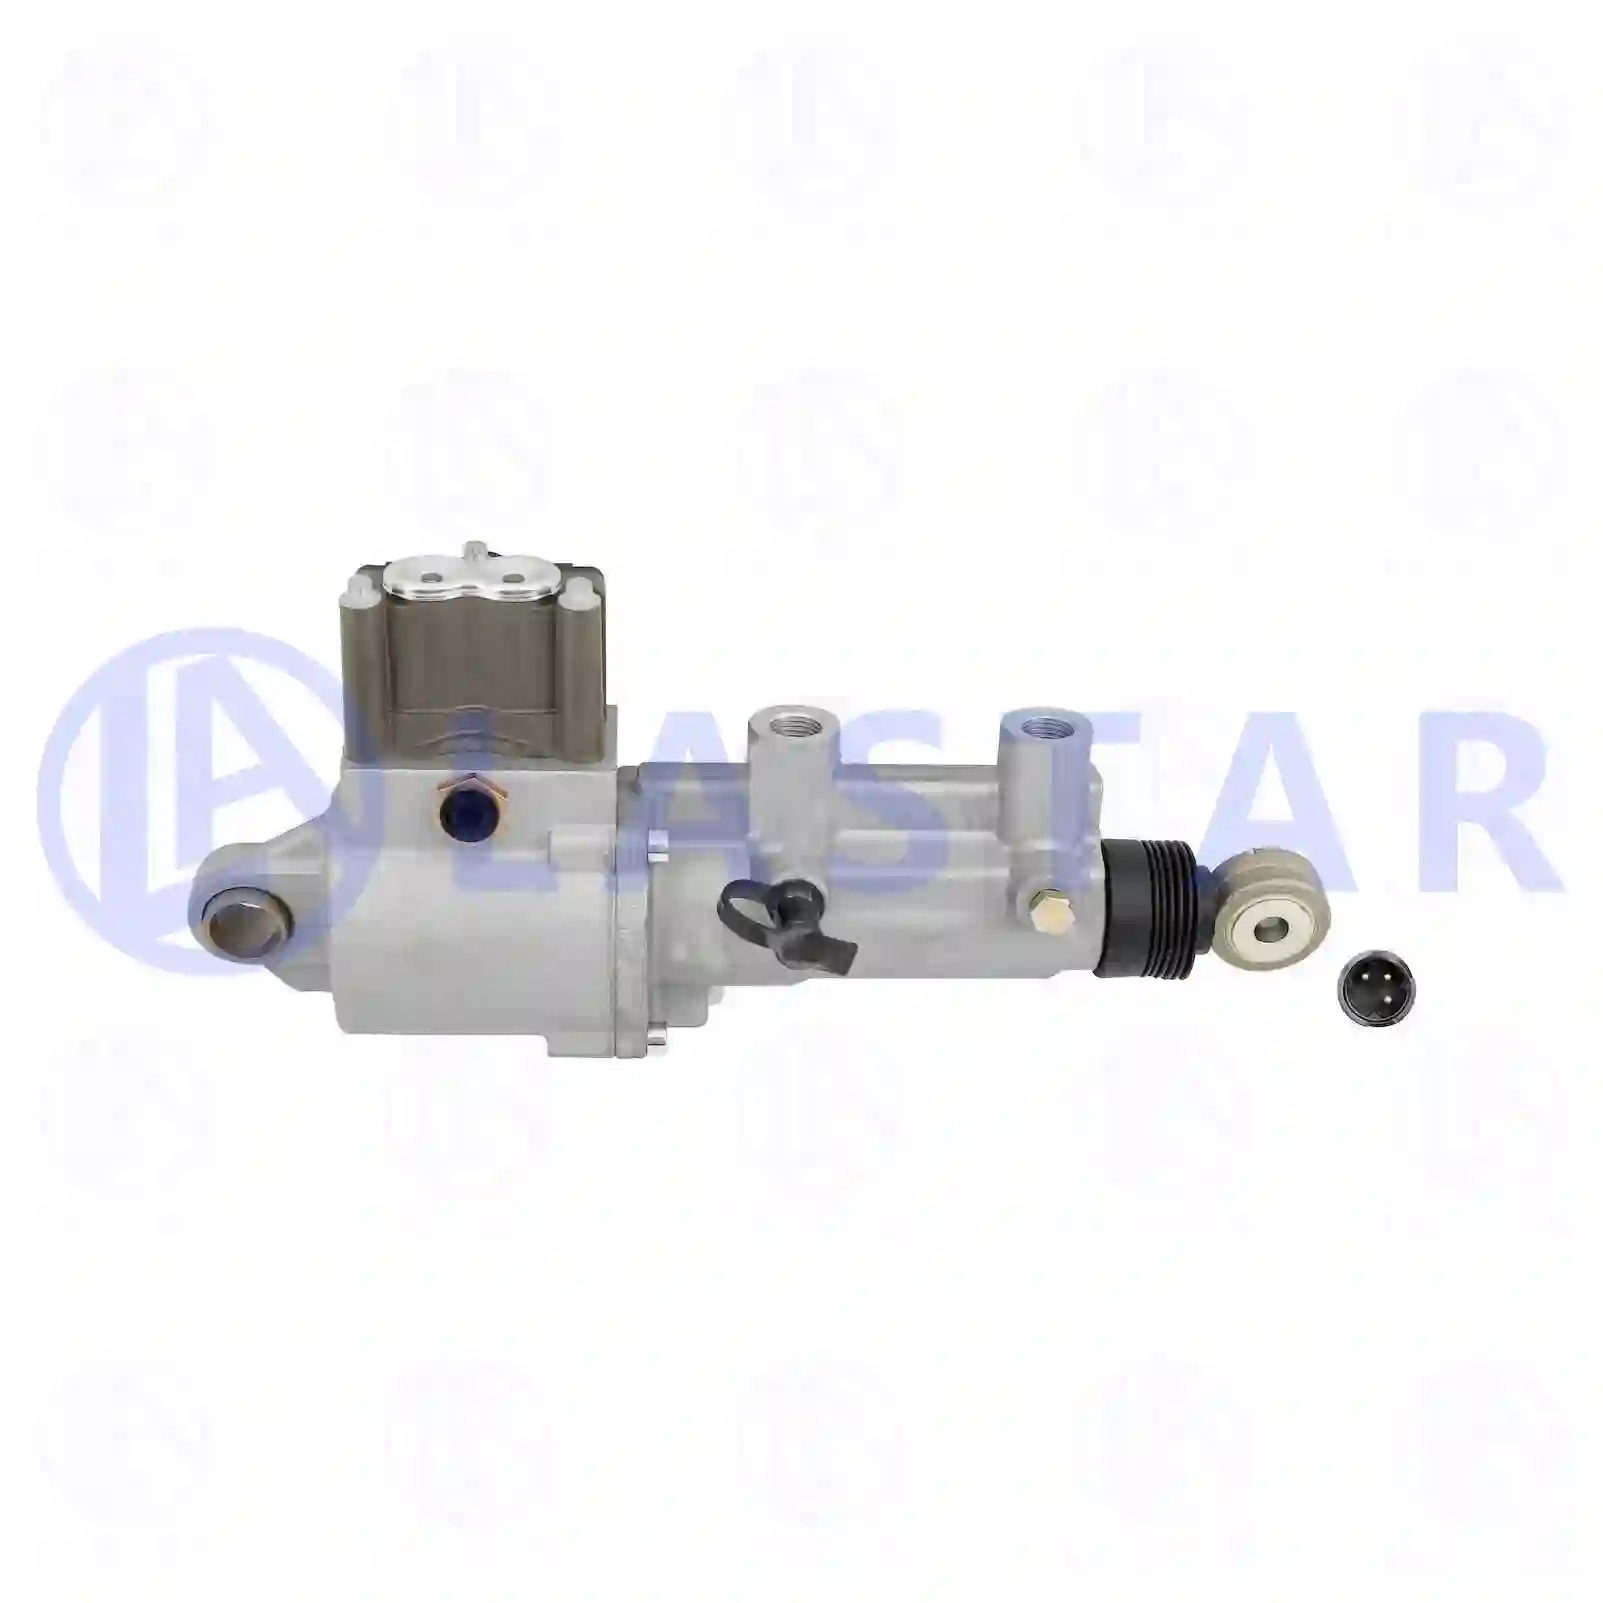 Shifting cylinder, 77732612, 0012603963, 0012605963, ZG30599-0008 ||  77732612 Lastar Spare Part | Truck Spare Parts, Auotomotive Spare Parts Shifting cylinder, 77732612, 0012603963, 0012605963, ZG30599-0008 ||  77732612 Lastar Spare Part | Truck Spare Parts, Auotomotive Spare Parts